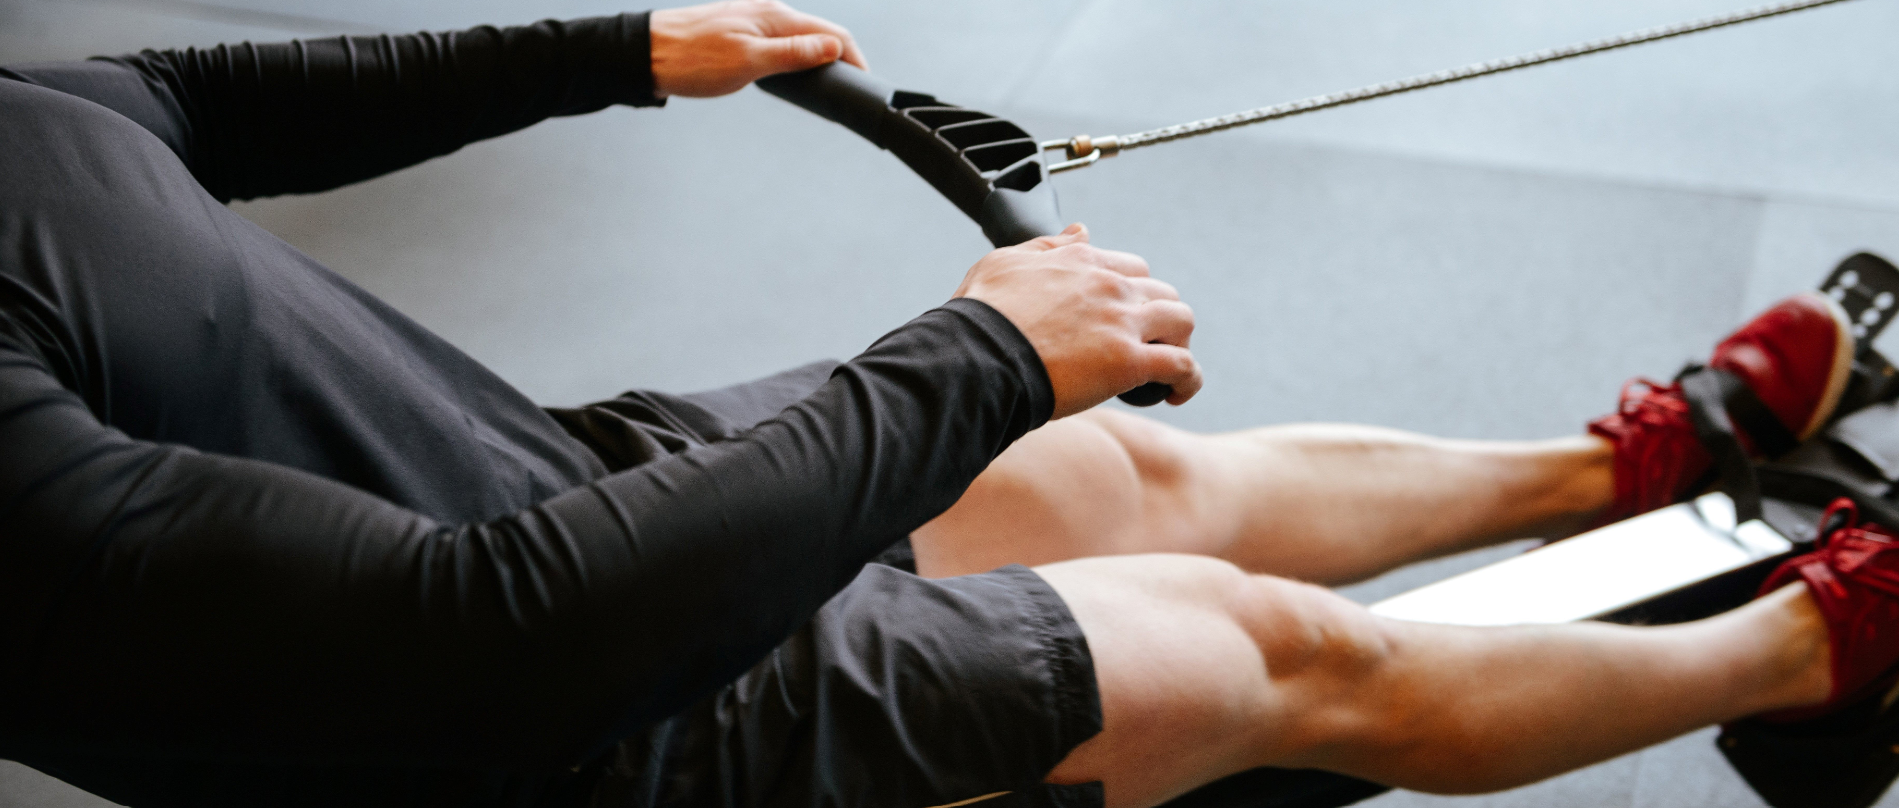 Leaning forward while rowing can cause a strain on the back and neck, so it's essential to maintain a proper posture.